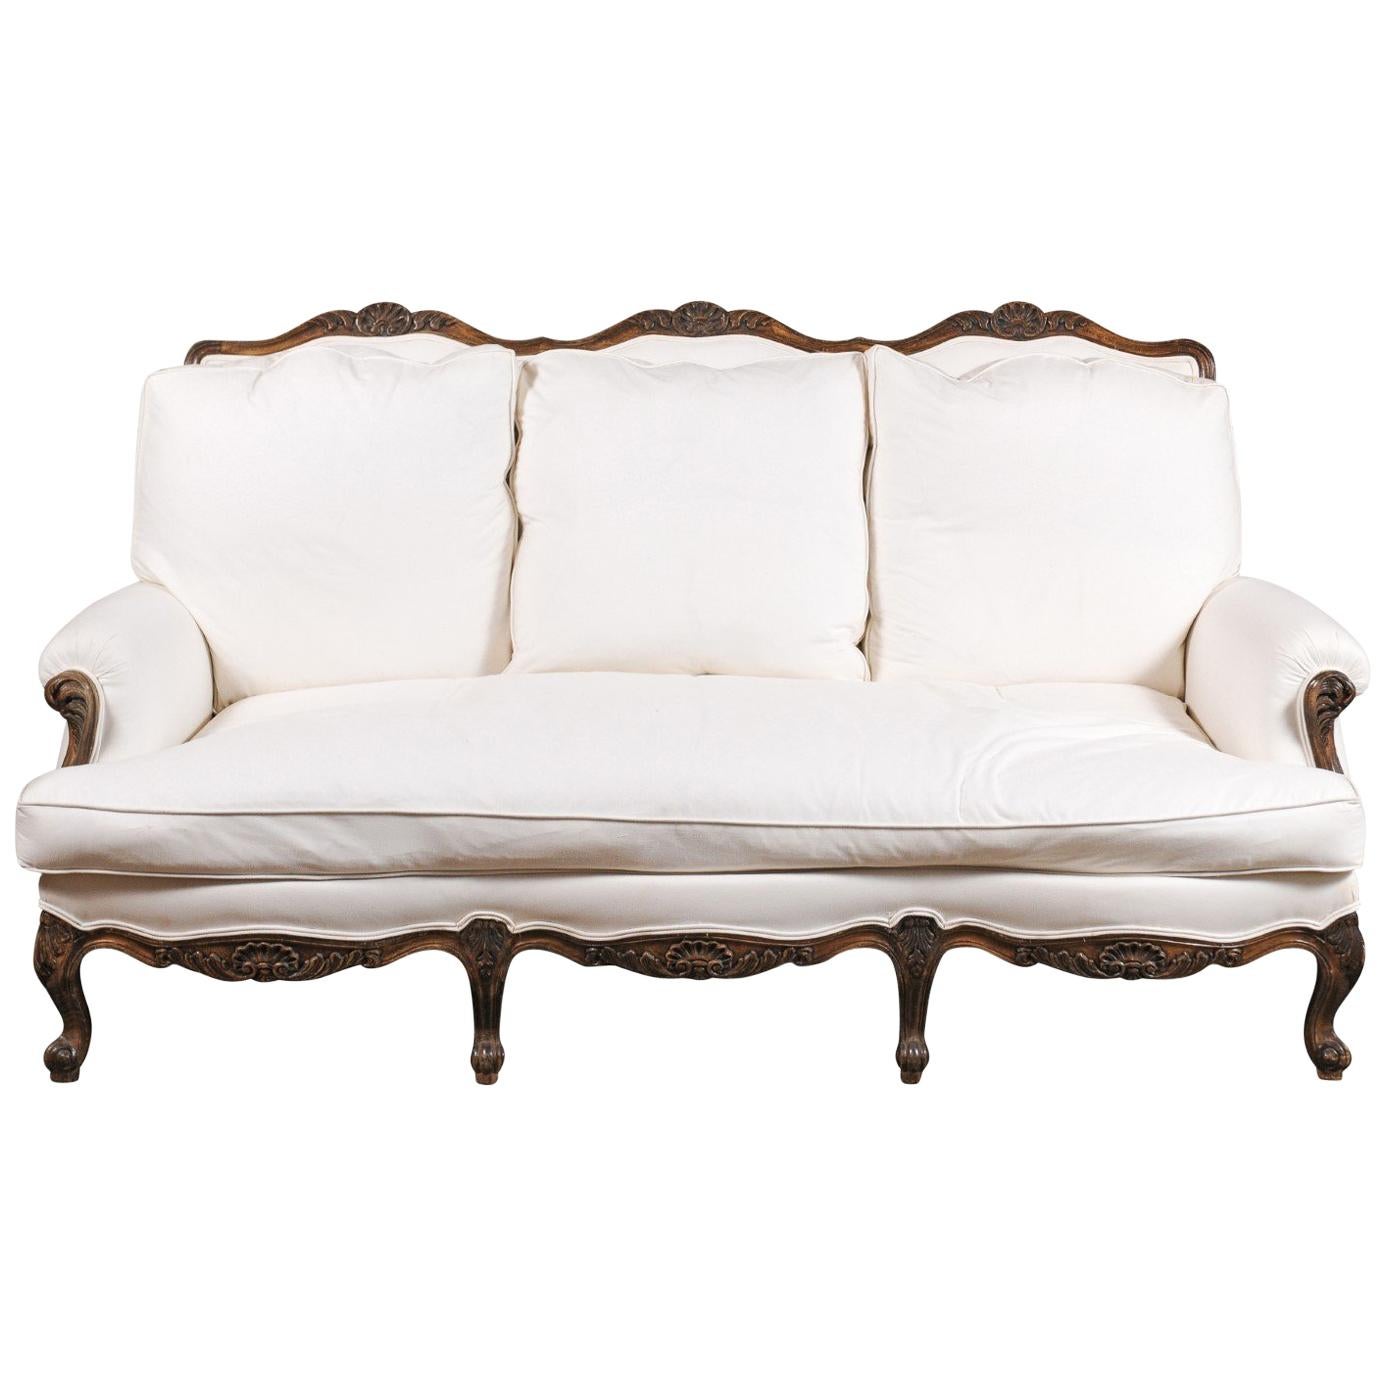 French Louis XV Style 19th Century Carved Wood Three-Seat Sofa with Shell Motifs